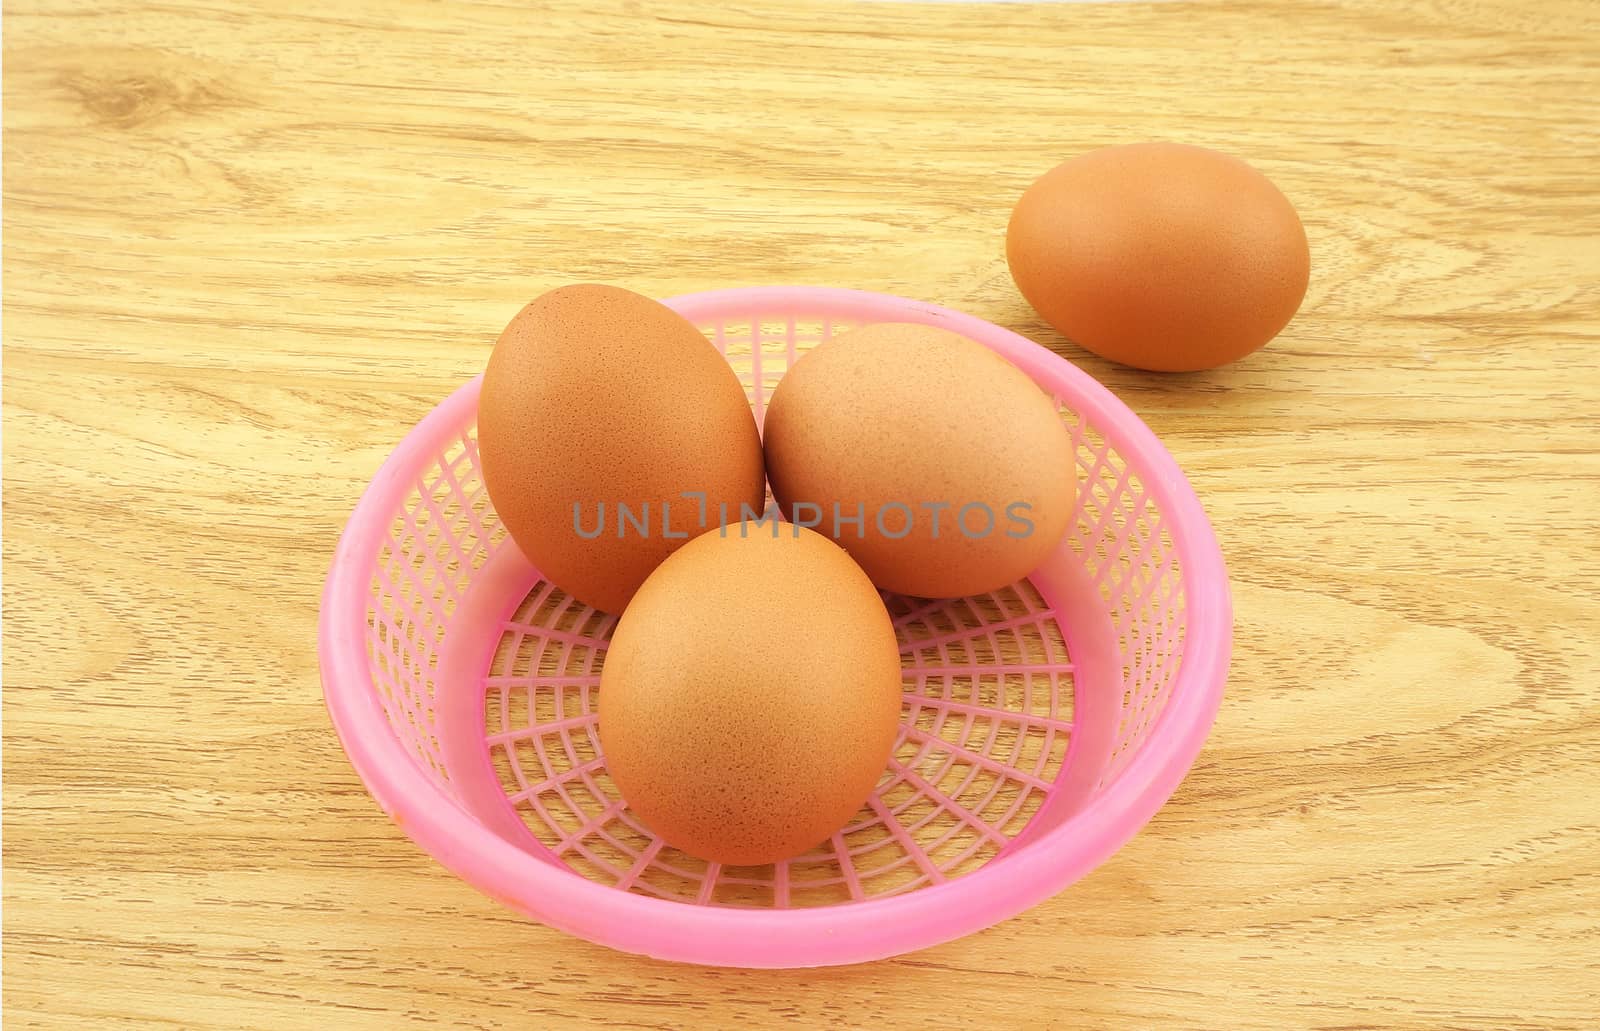 Fresh egg laid on a wooden table. Three eggs in pink basket, another bubble is placed on the outside.                               